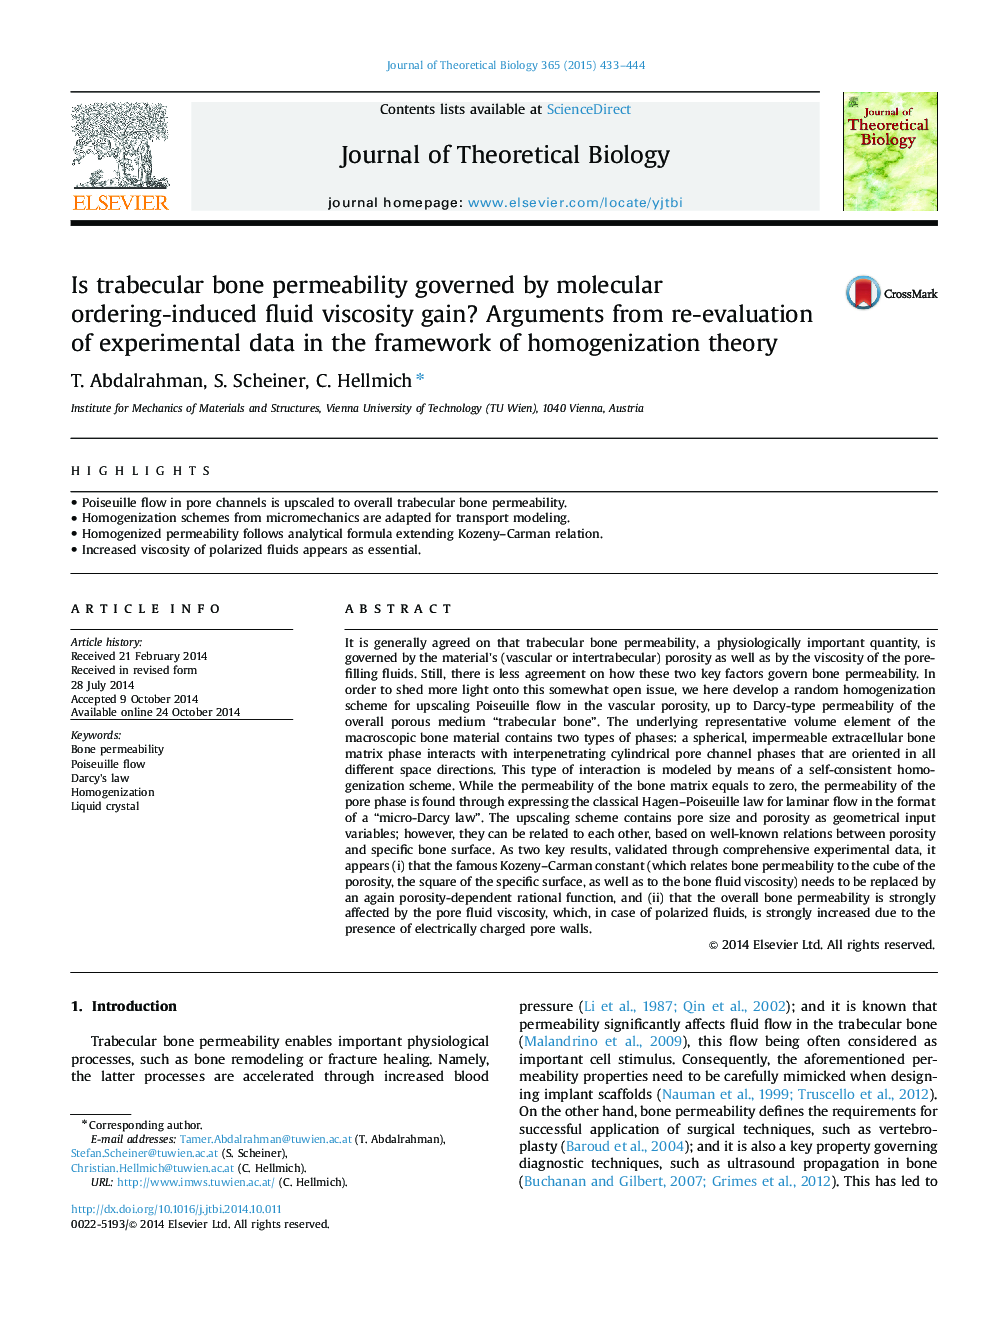 Is trabecular bone permeability governed by molecular ordering-induced fluid viscosity gain? Arguments from re-evaluation of experimental data in the framework of homogenization theory